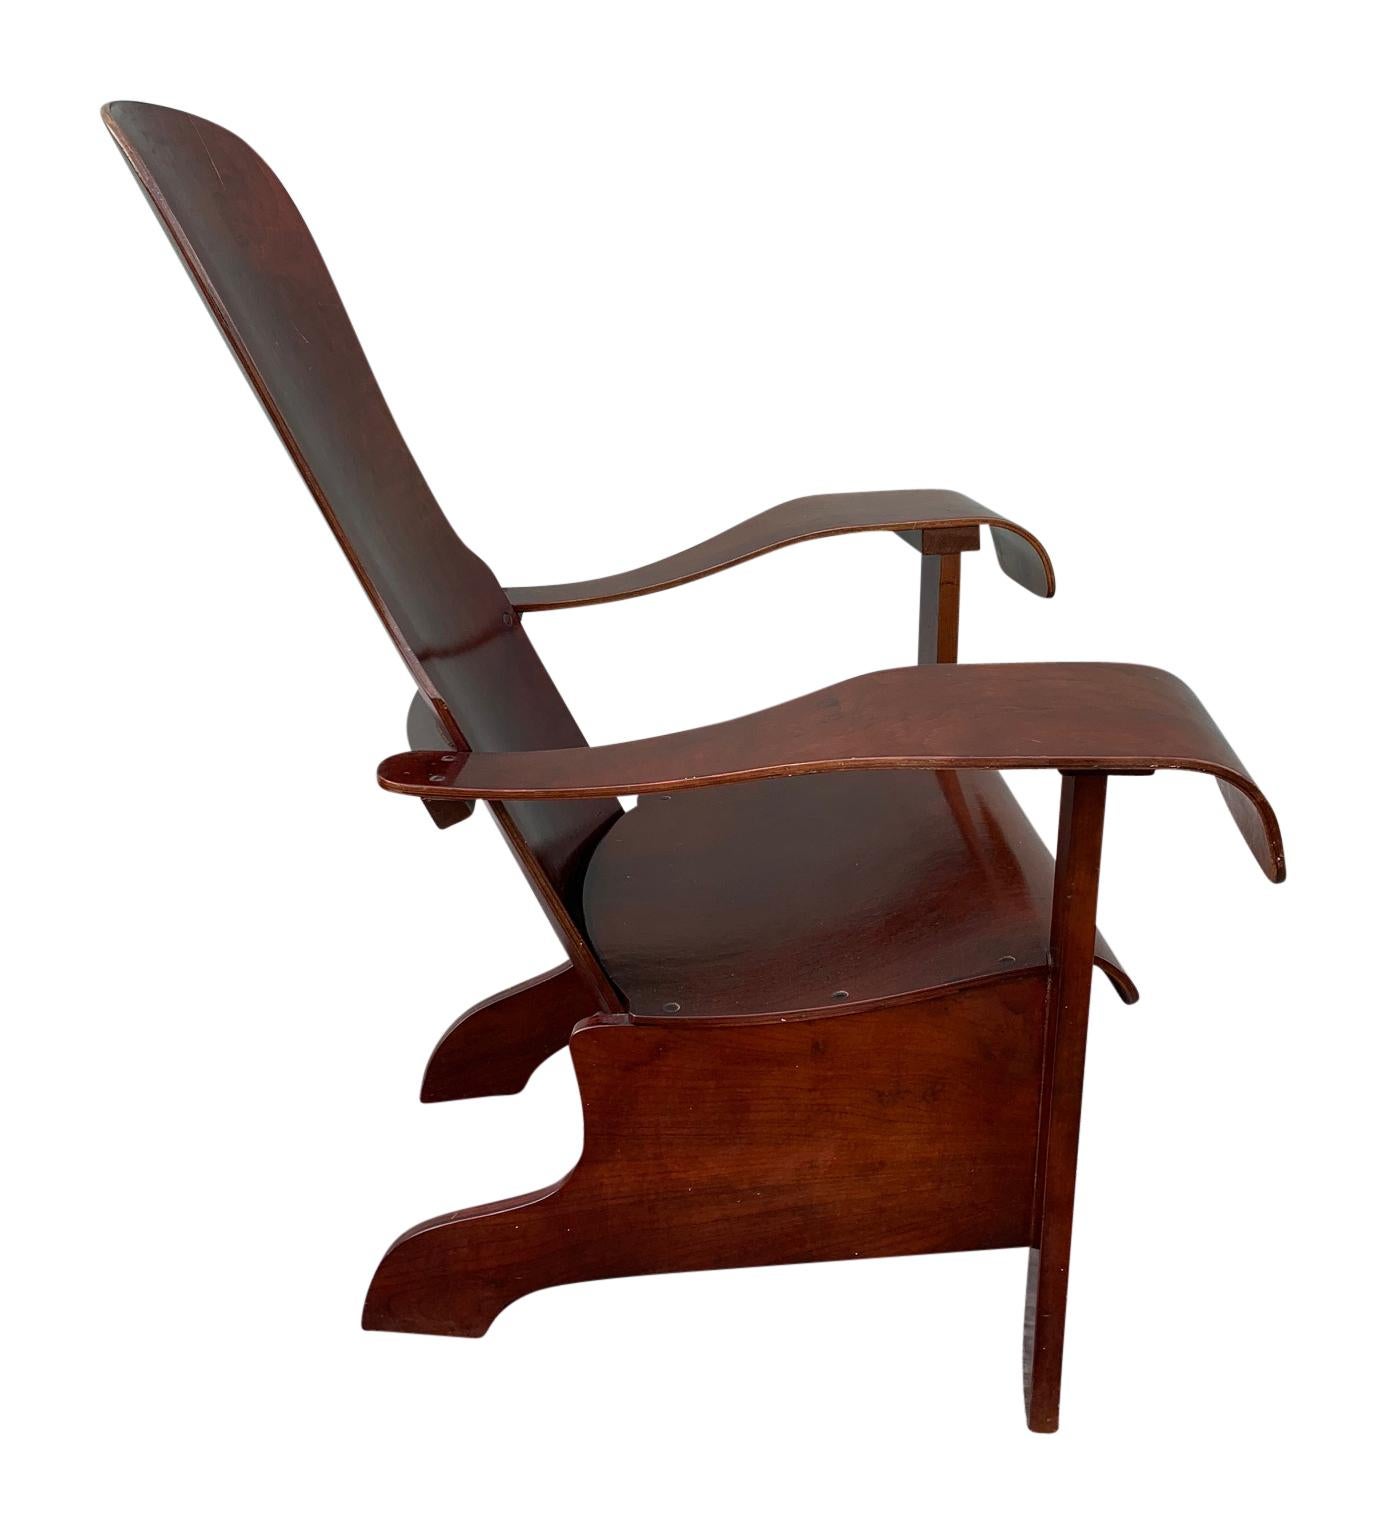 Brazilian Bentwood lounge chair by Moveis Cimo Mid-Century Modern.